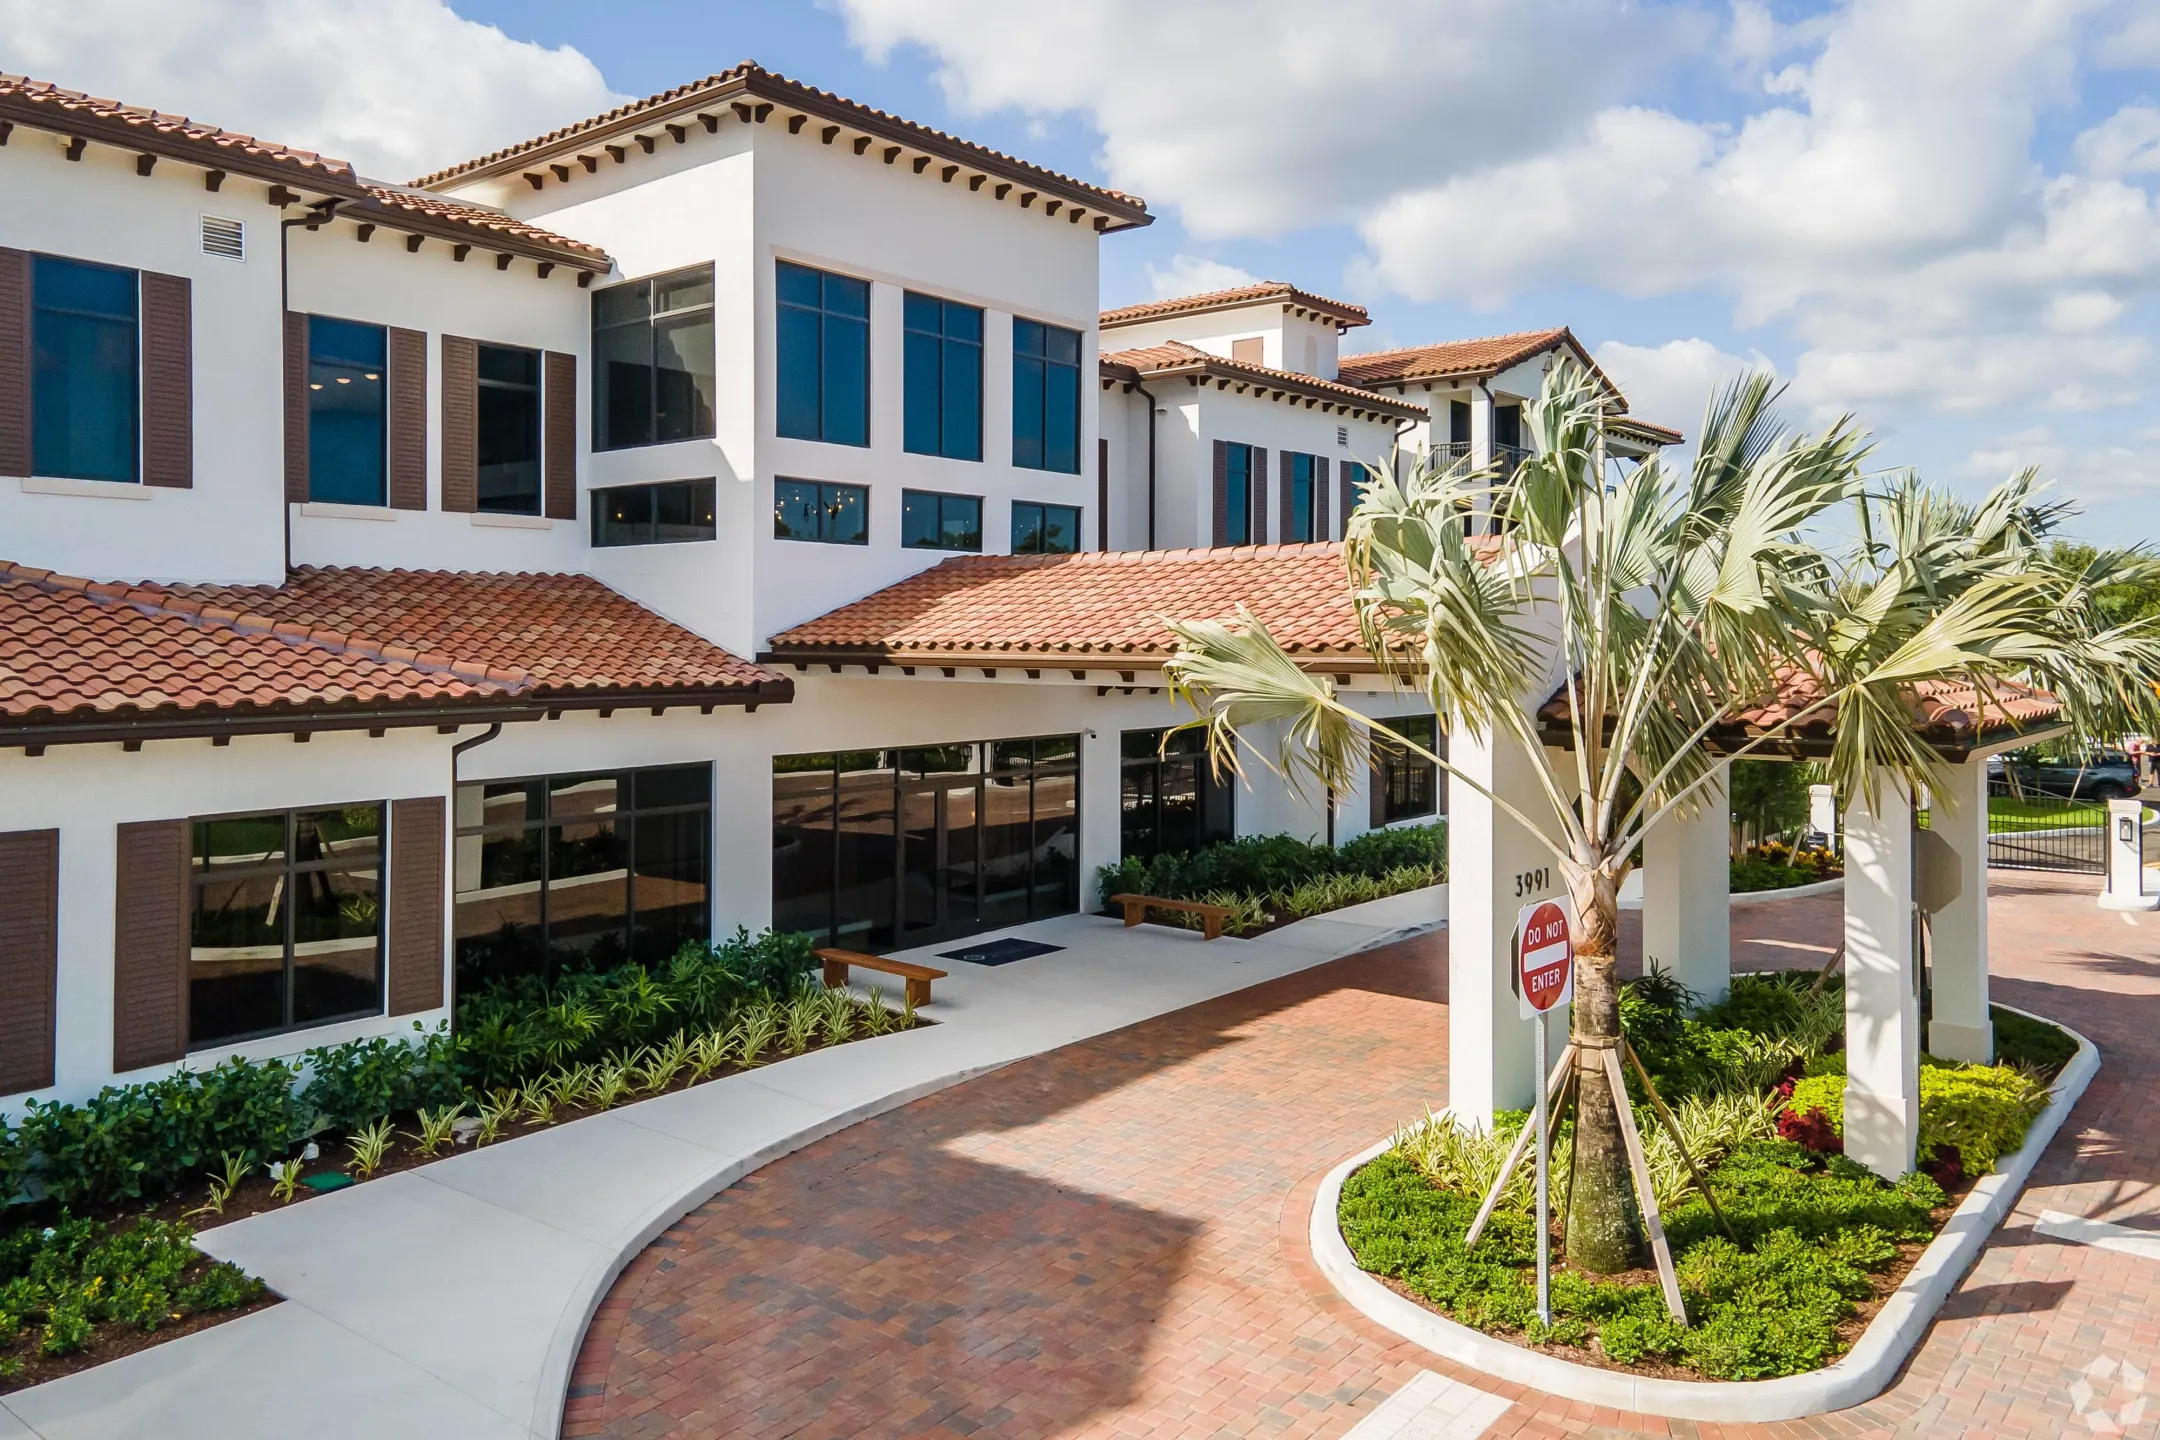 Building - The Residences at Monterra Commons - 55+ Active Adult Community - Pembroke Pines, FL